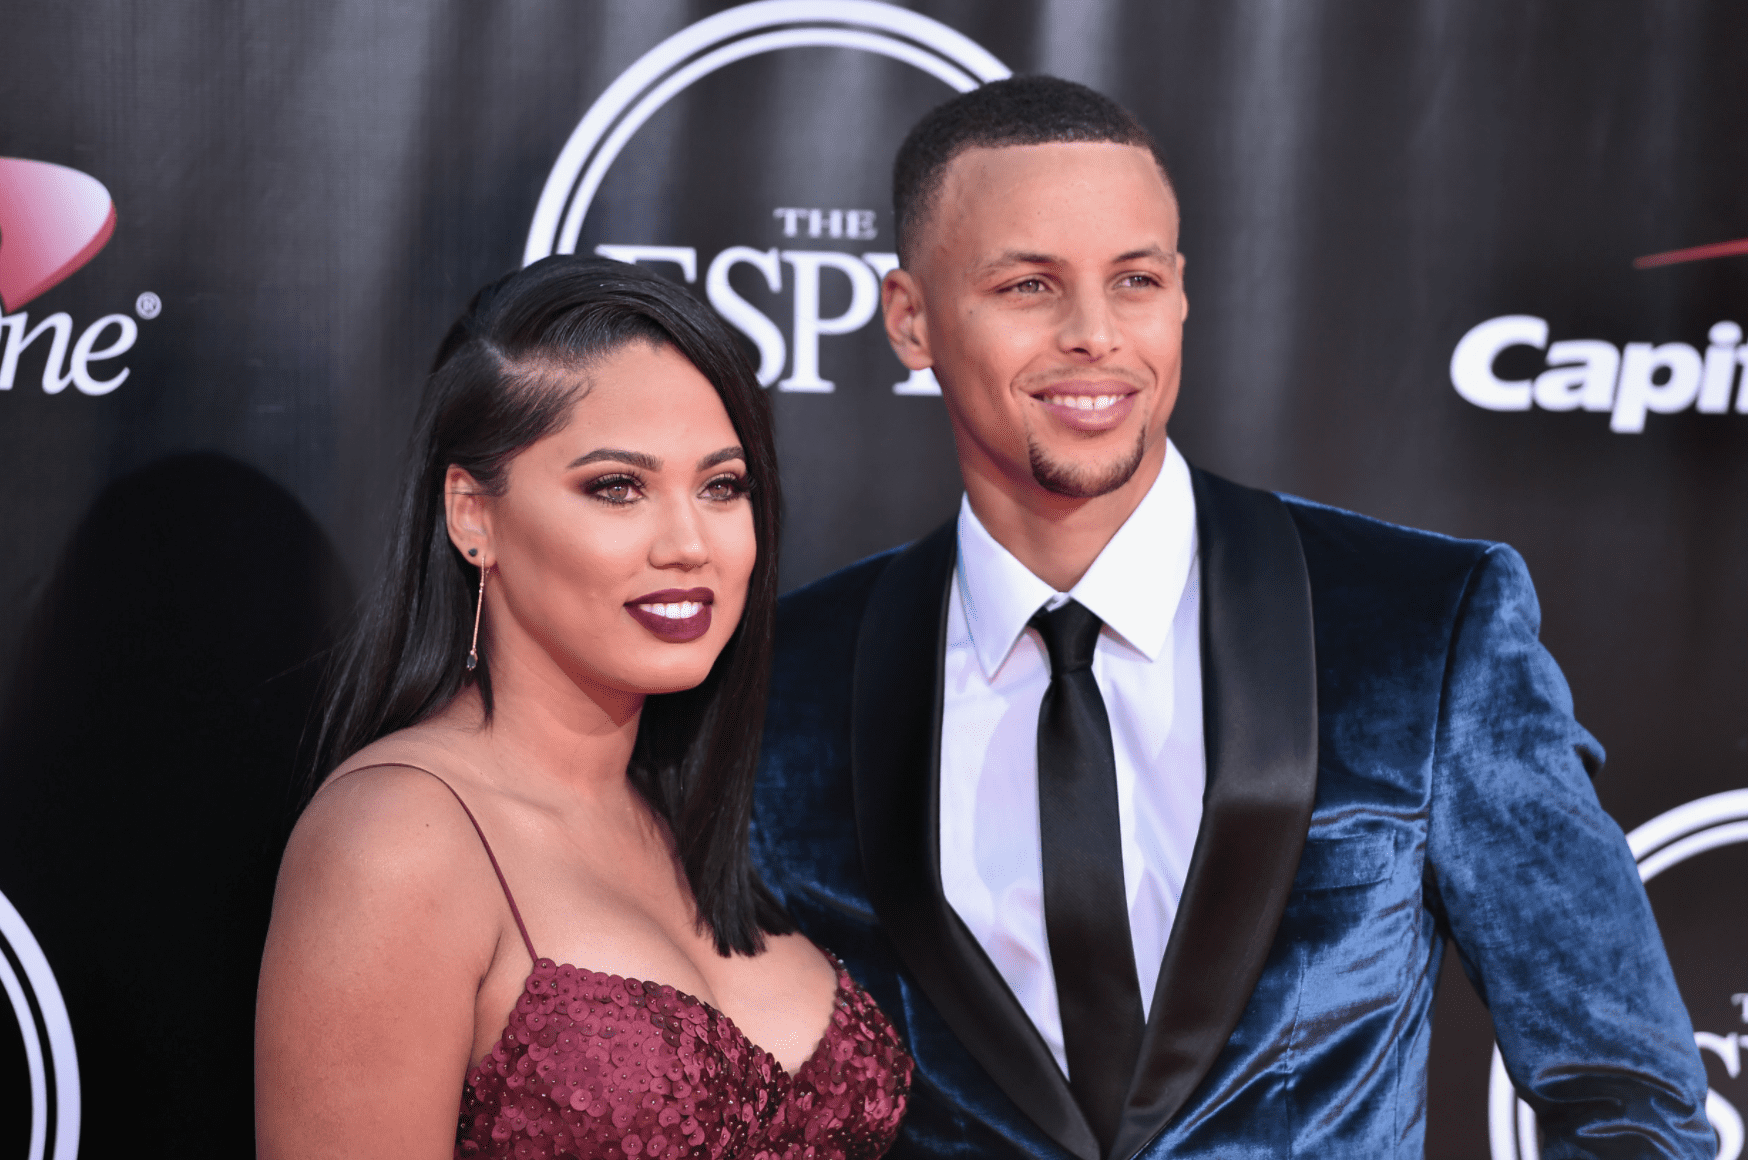 Stephen Curry and Ayesha Curry at the 2016 ESPYS at Microsoft Theater on July 13, 2016. | Source: Getty Images